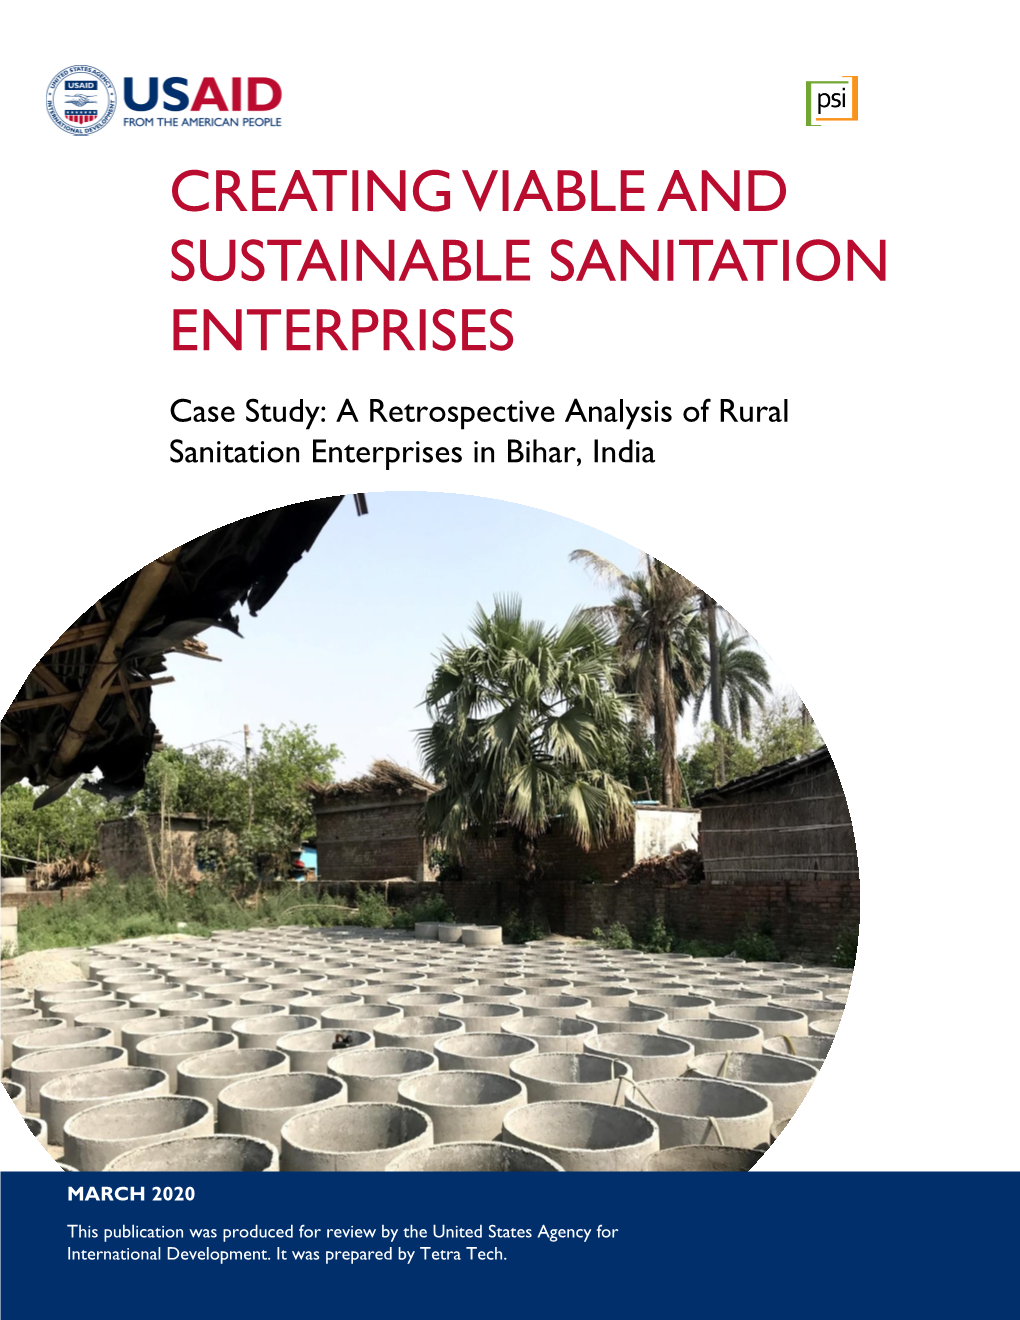 CREATING VIABLE and SUSTAINABLE SANITATION ENTERPRISES Case Study: a Retrospective Analysis of Rural Sanitation Enterprises in Bihar, India